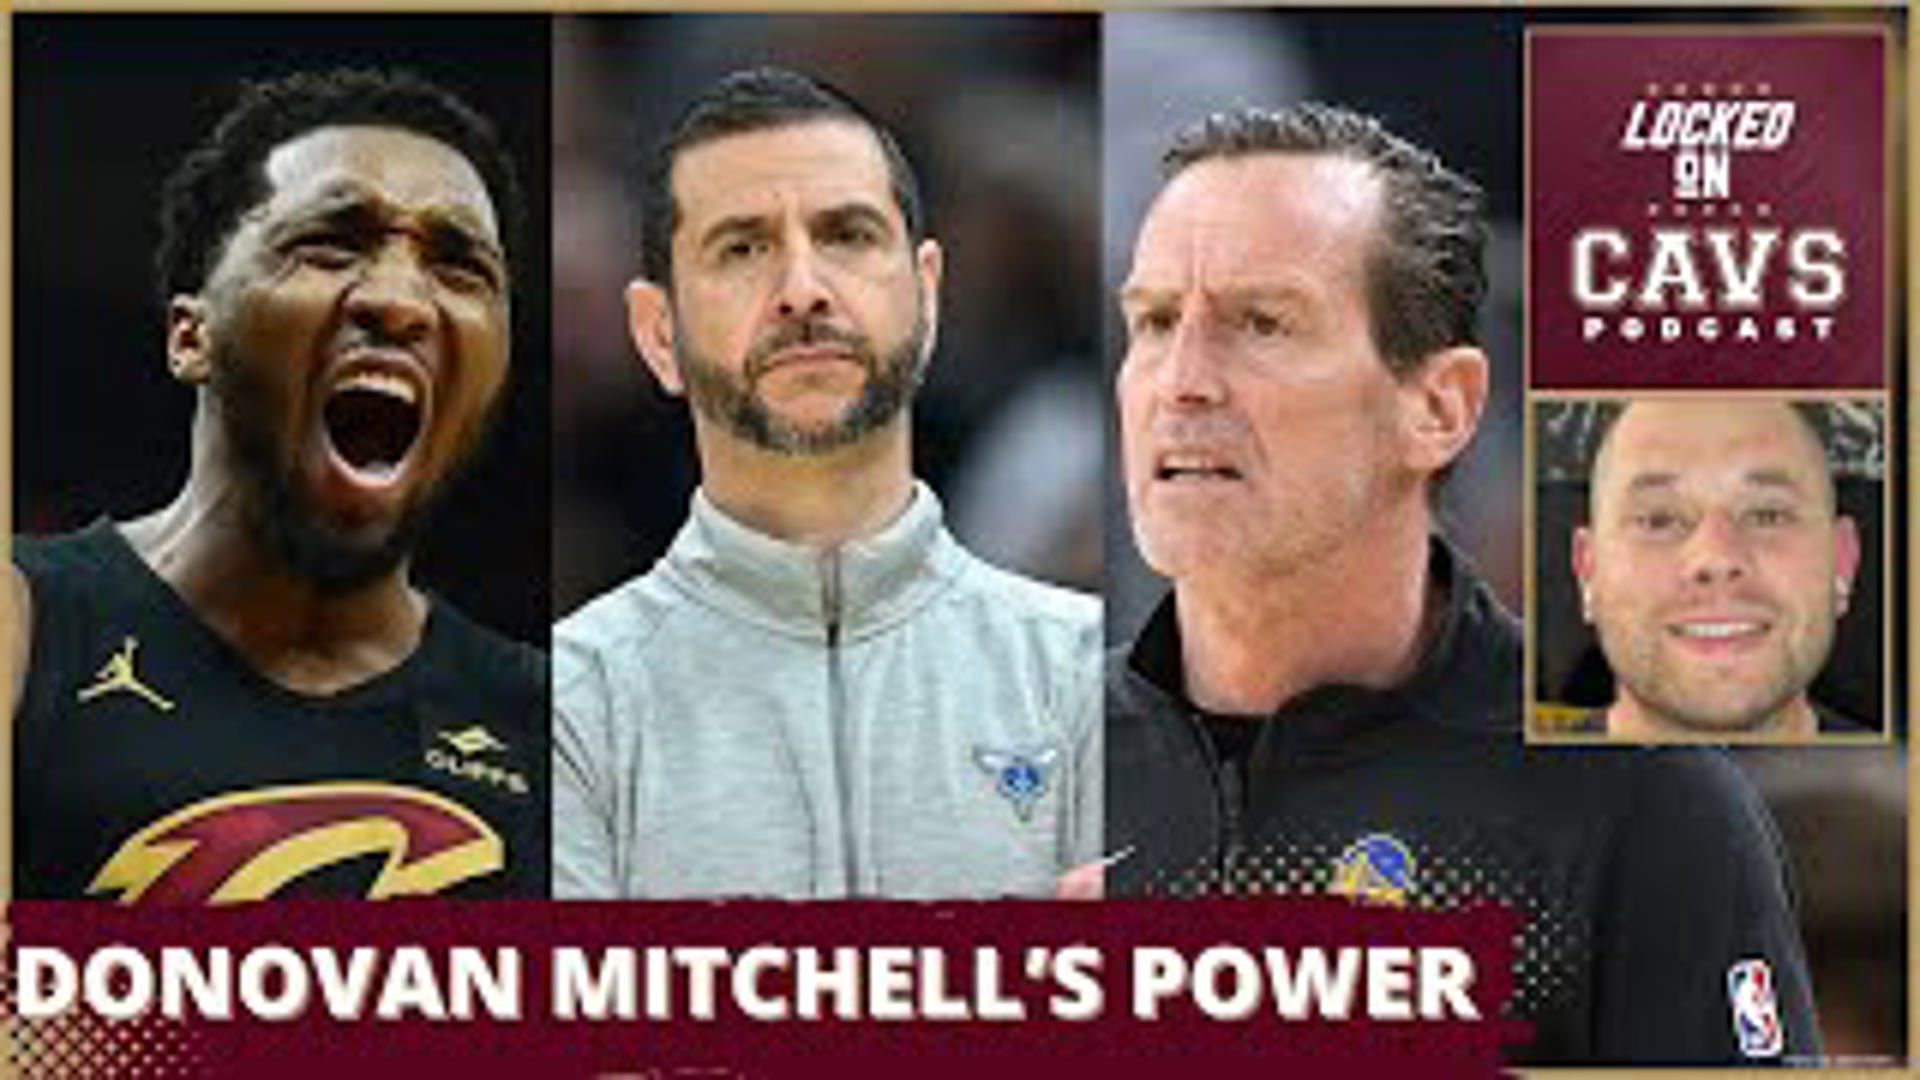 Danny Cunningham discusses how much power Cleveland Cavaliers star Donovan Mitchell should have when it comes to the organization selecting the next head coach.